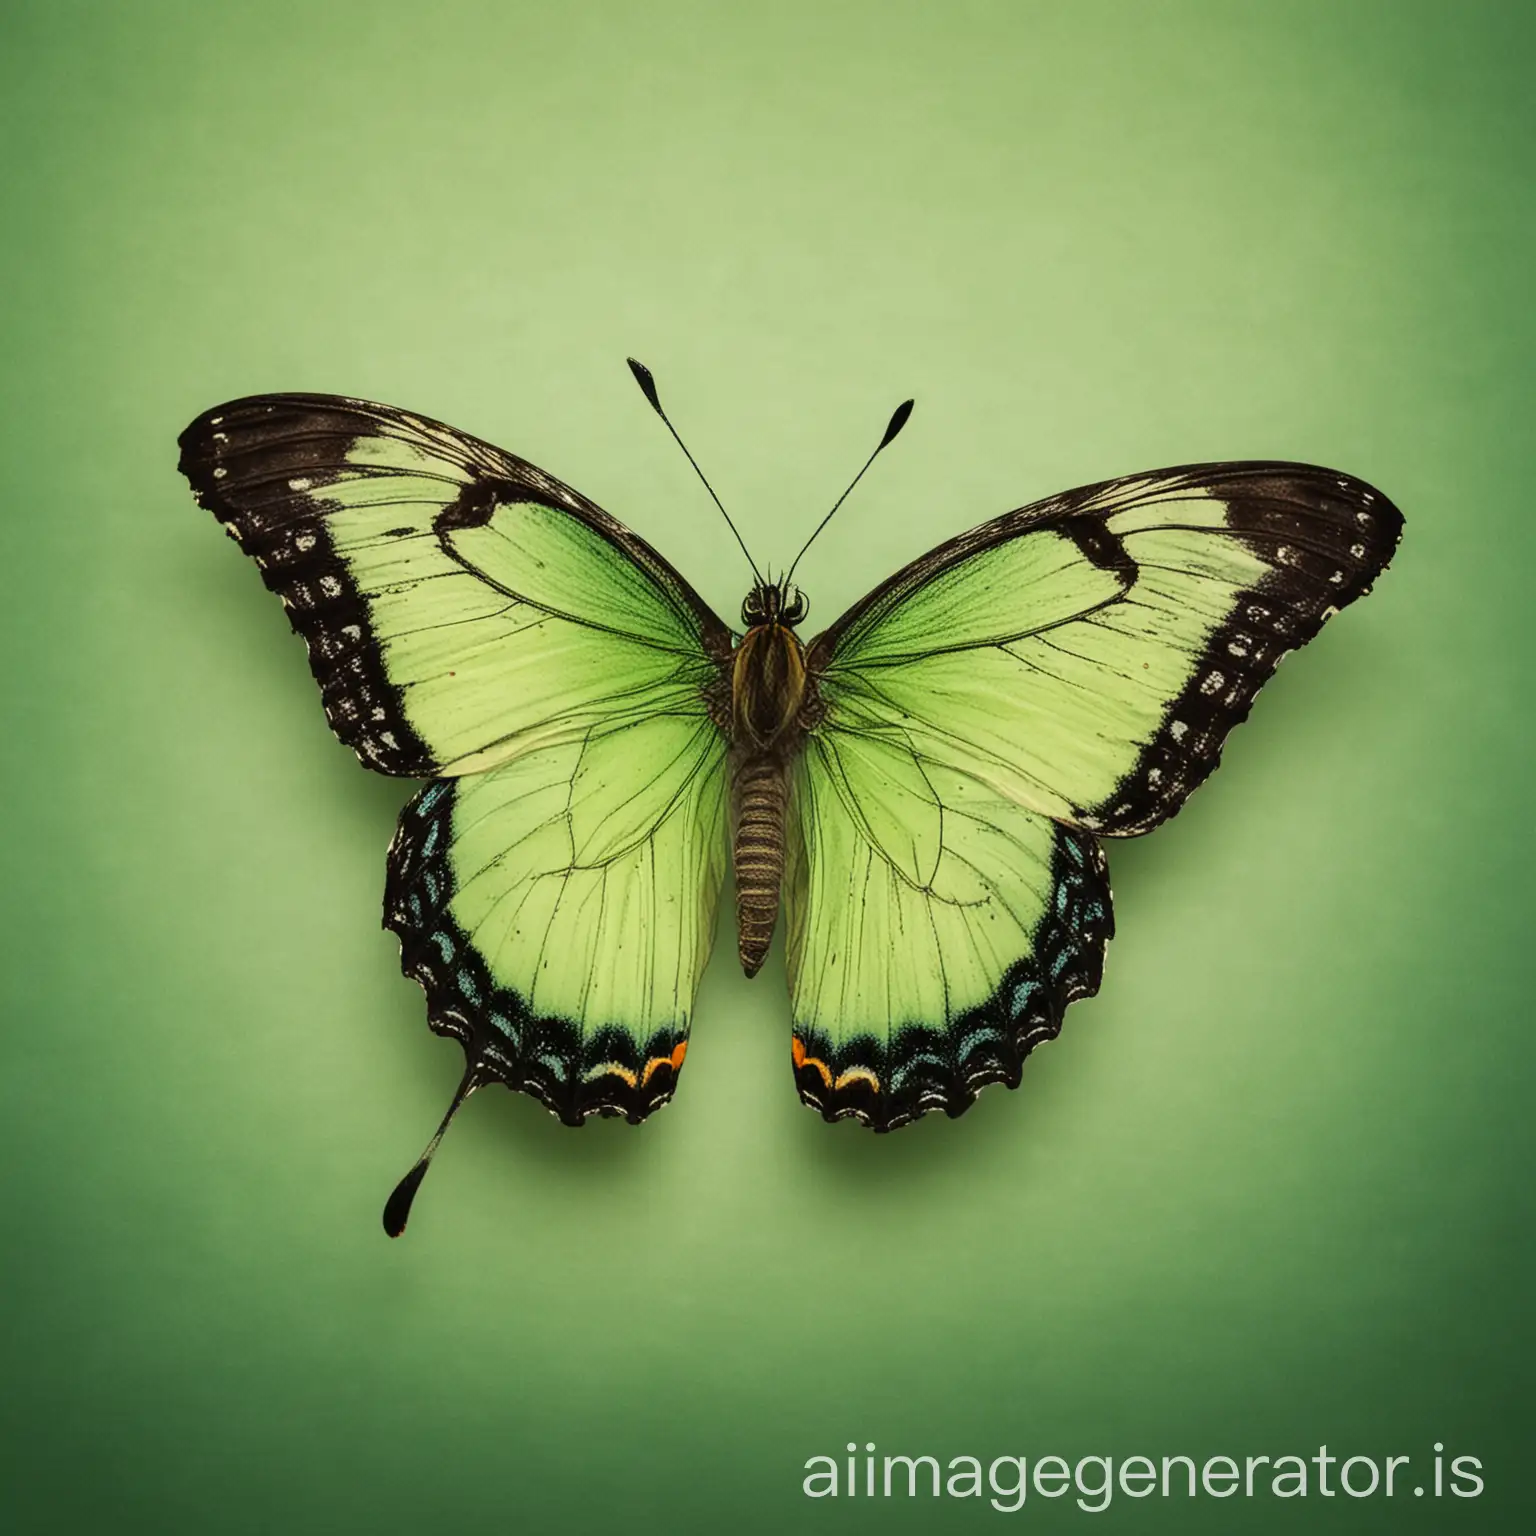 Vibrant-Green-Background-Butterfly-Beautiful-Insect-in-Lush-Foliage